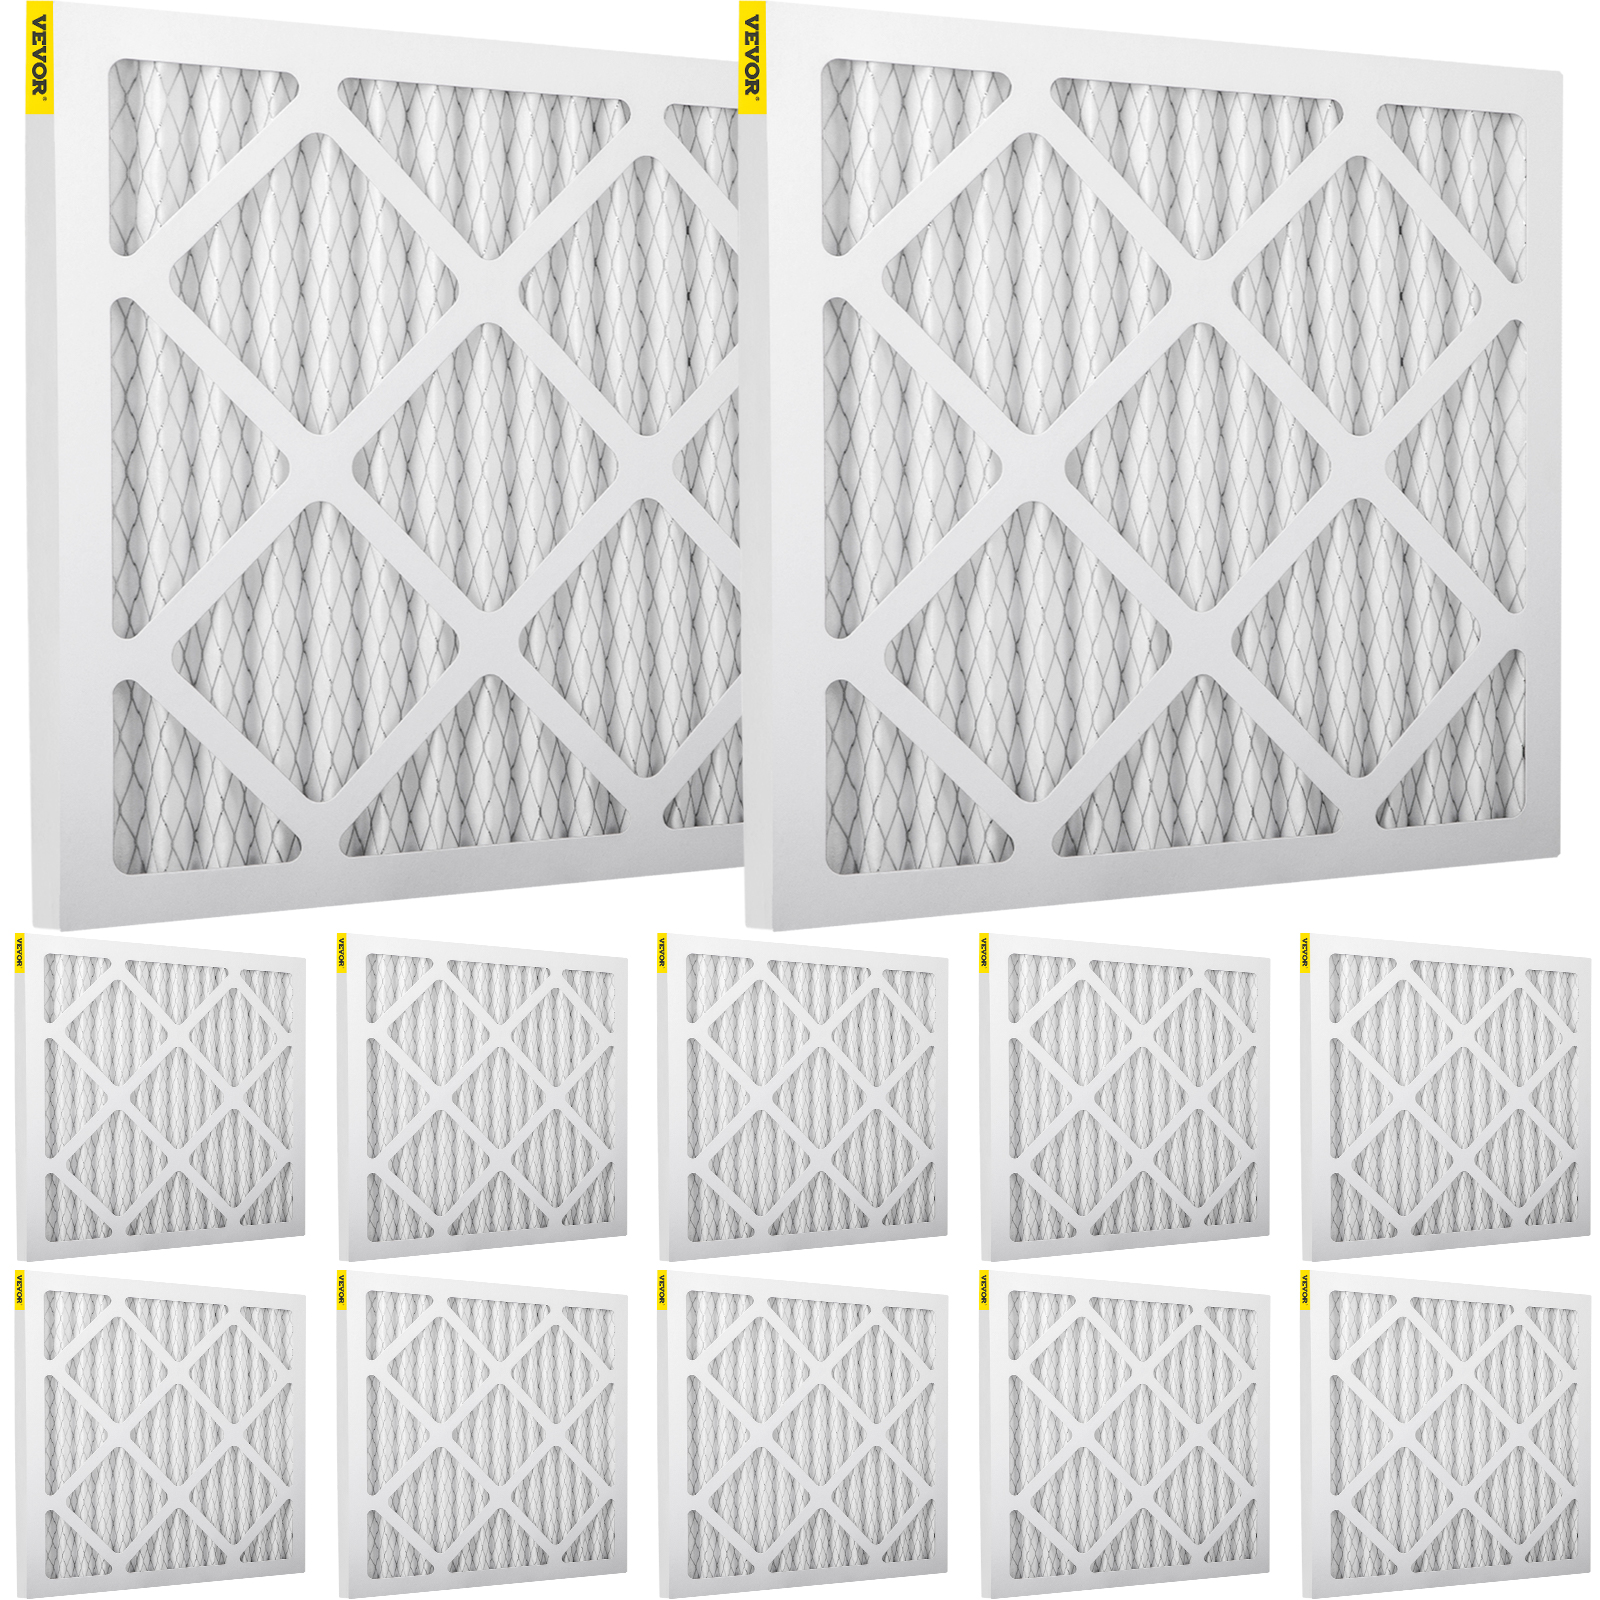 Vevor Hepa Filter Replacementset Pleated Air Filter16 X16 In 12pcs Merv 8 White от Vevor Many GEOs